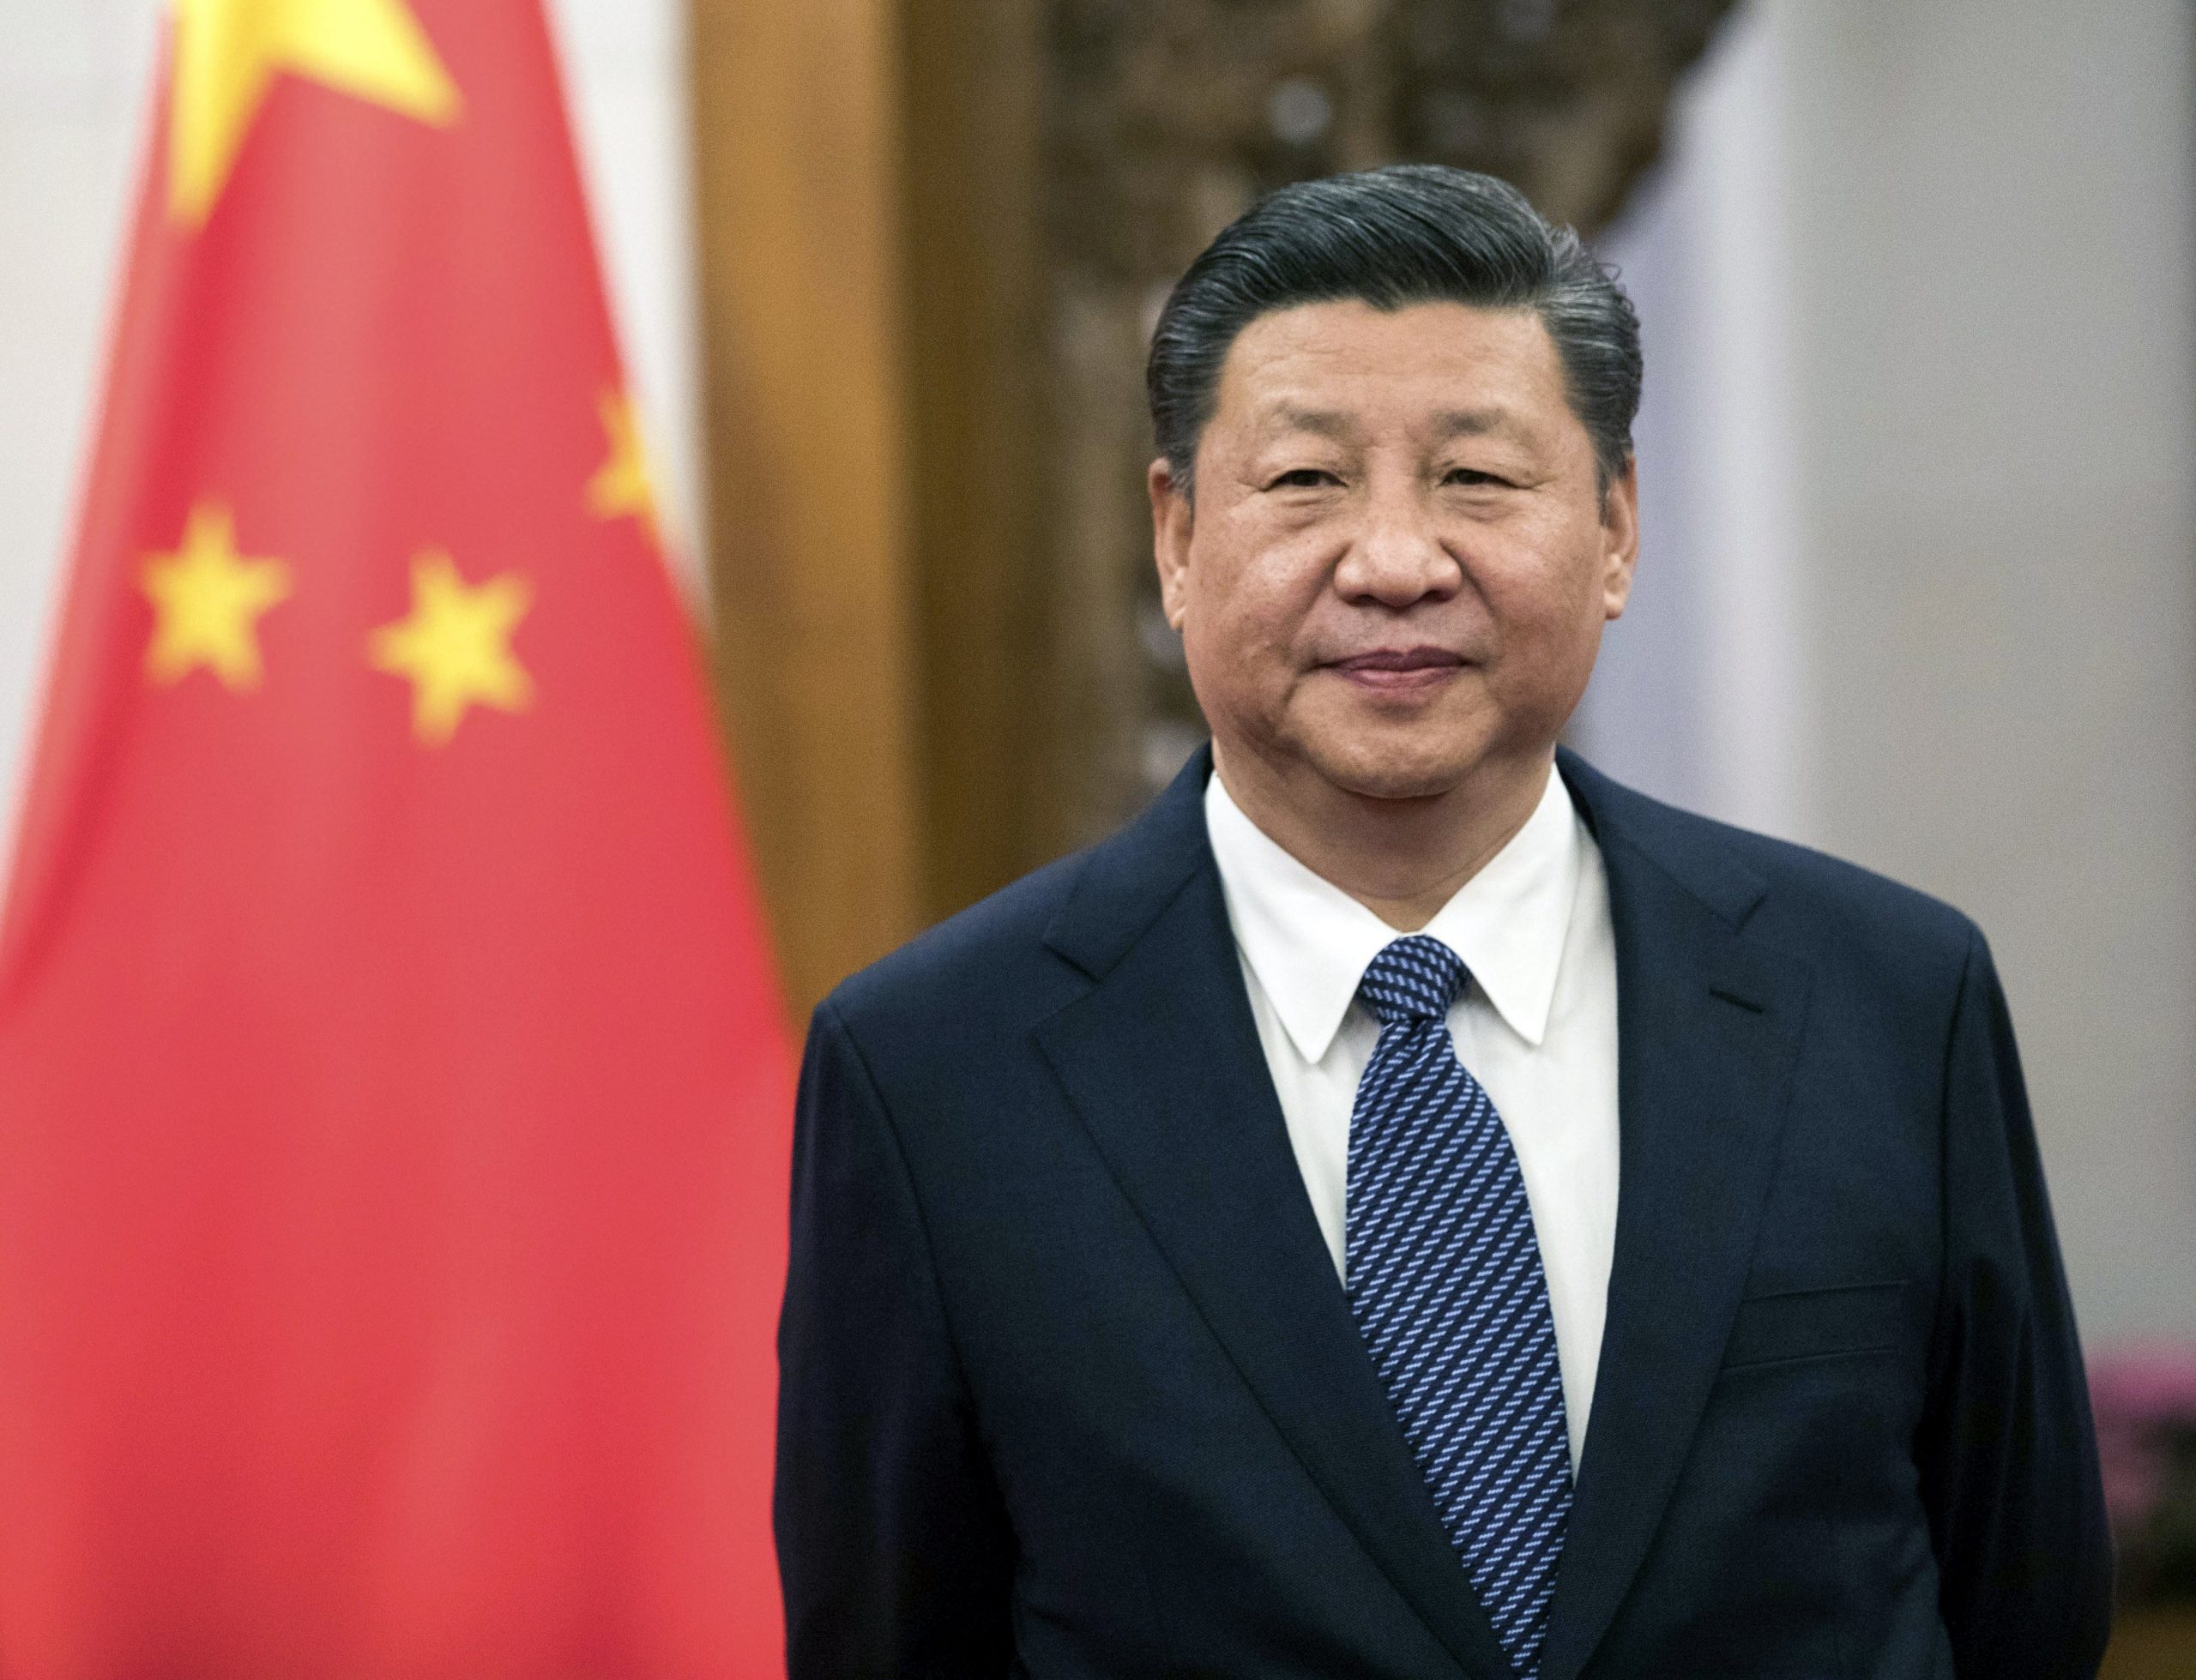 Chinese President: China Cannot Rely on International Markets to Ensure Food Security